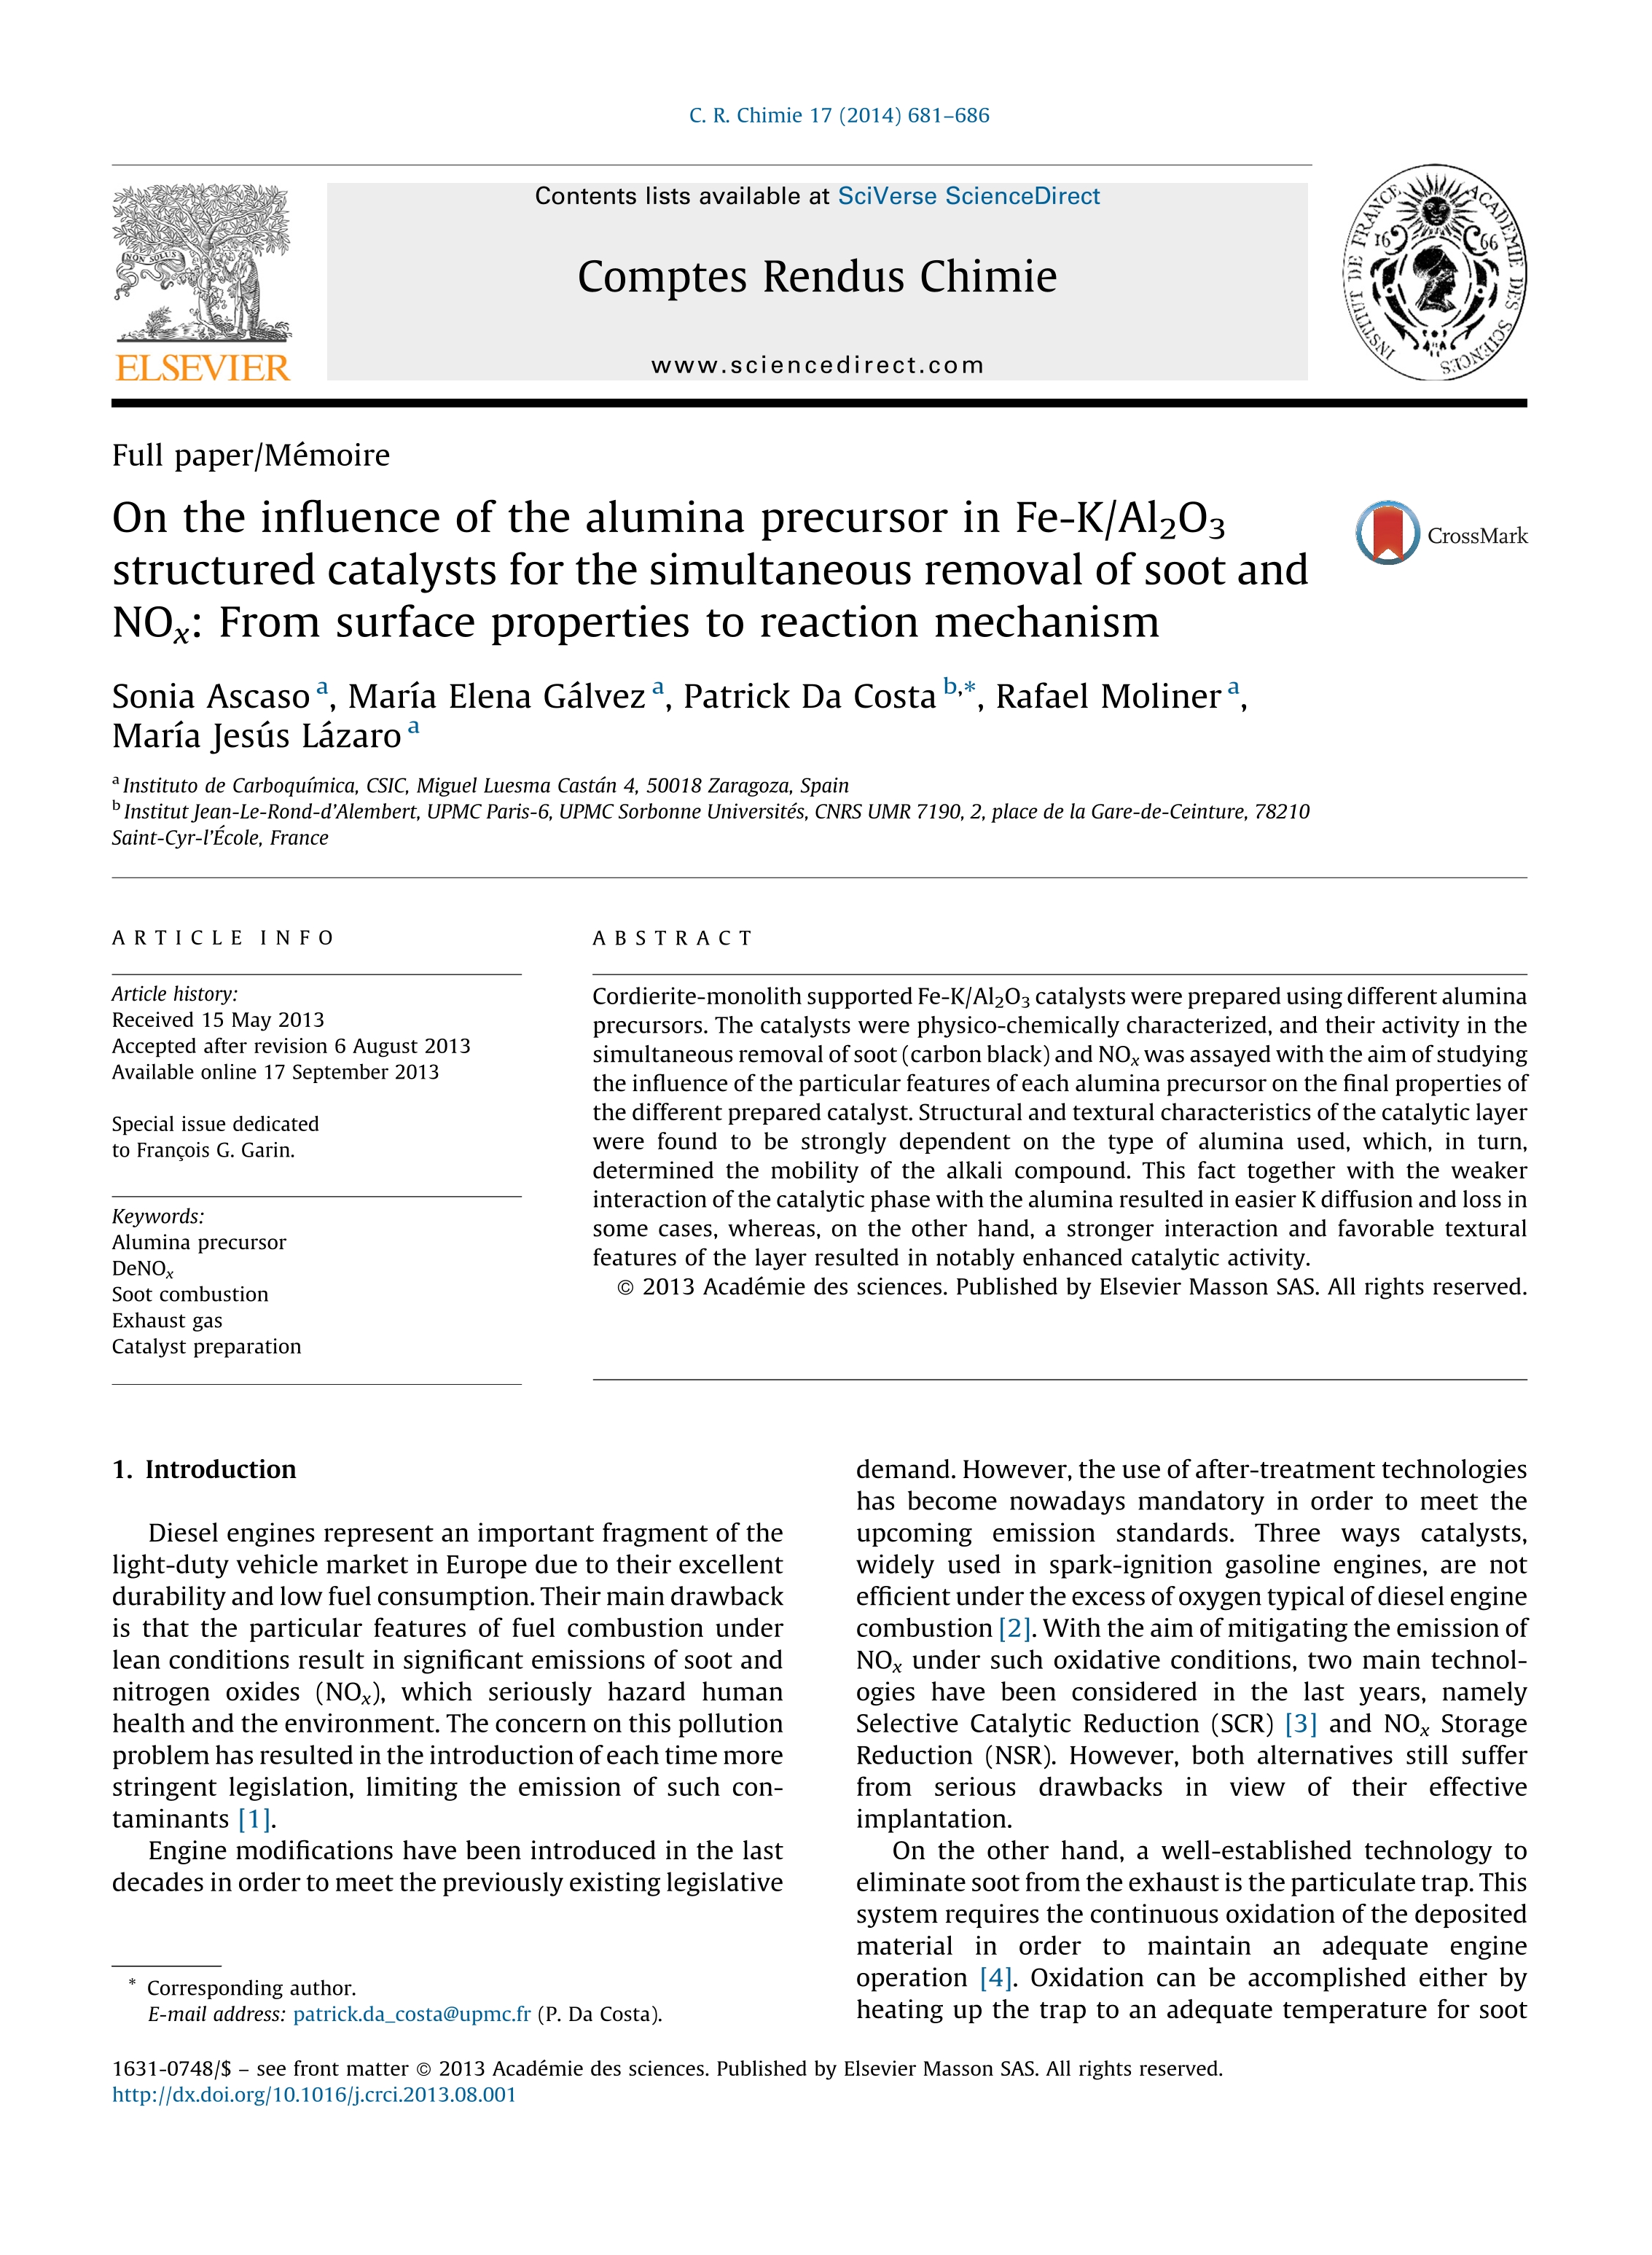 On the influence of the alumina precursor in Fe-K/Al2O3 structured catalysts for the simultaneous removal of soot and NOx: From surface properties to reaction mechanism